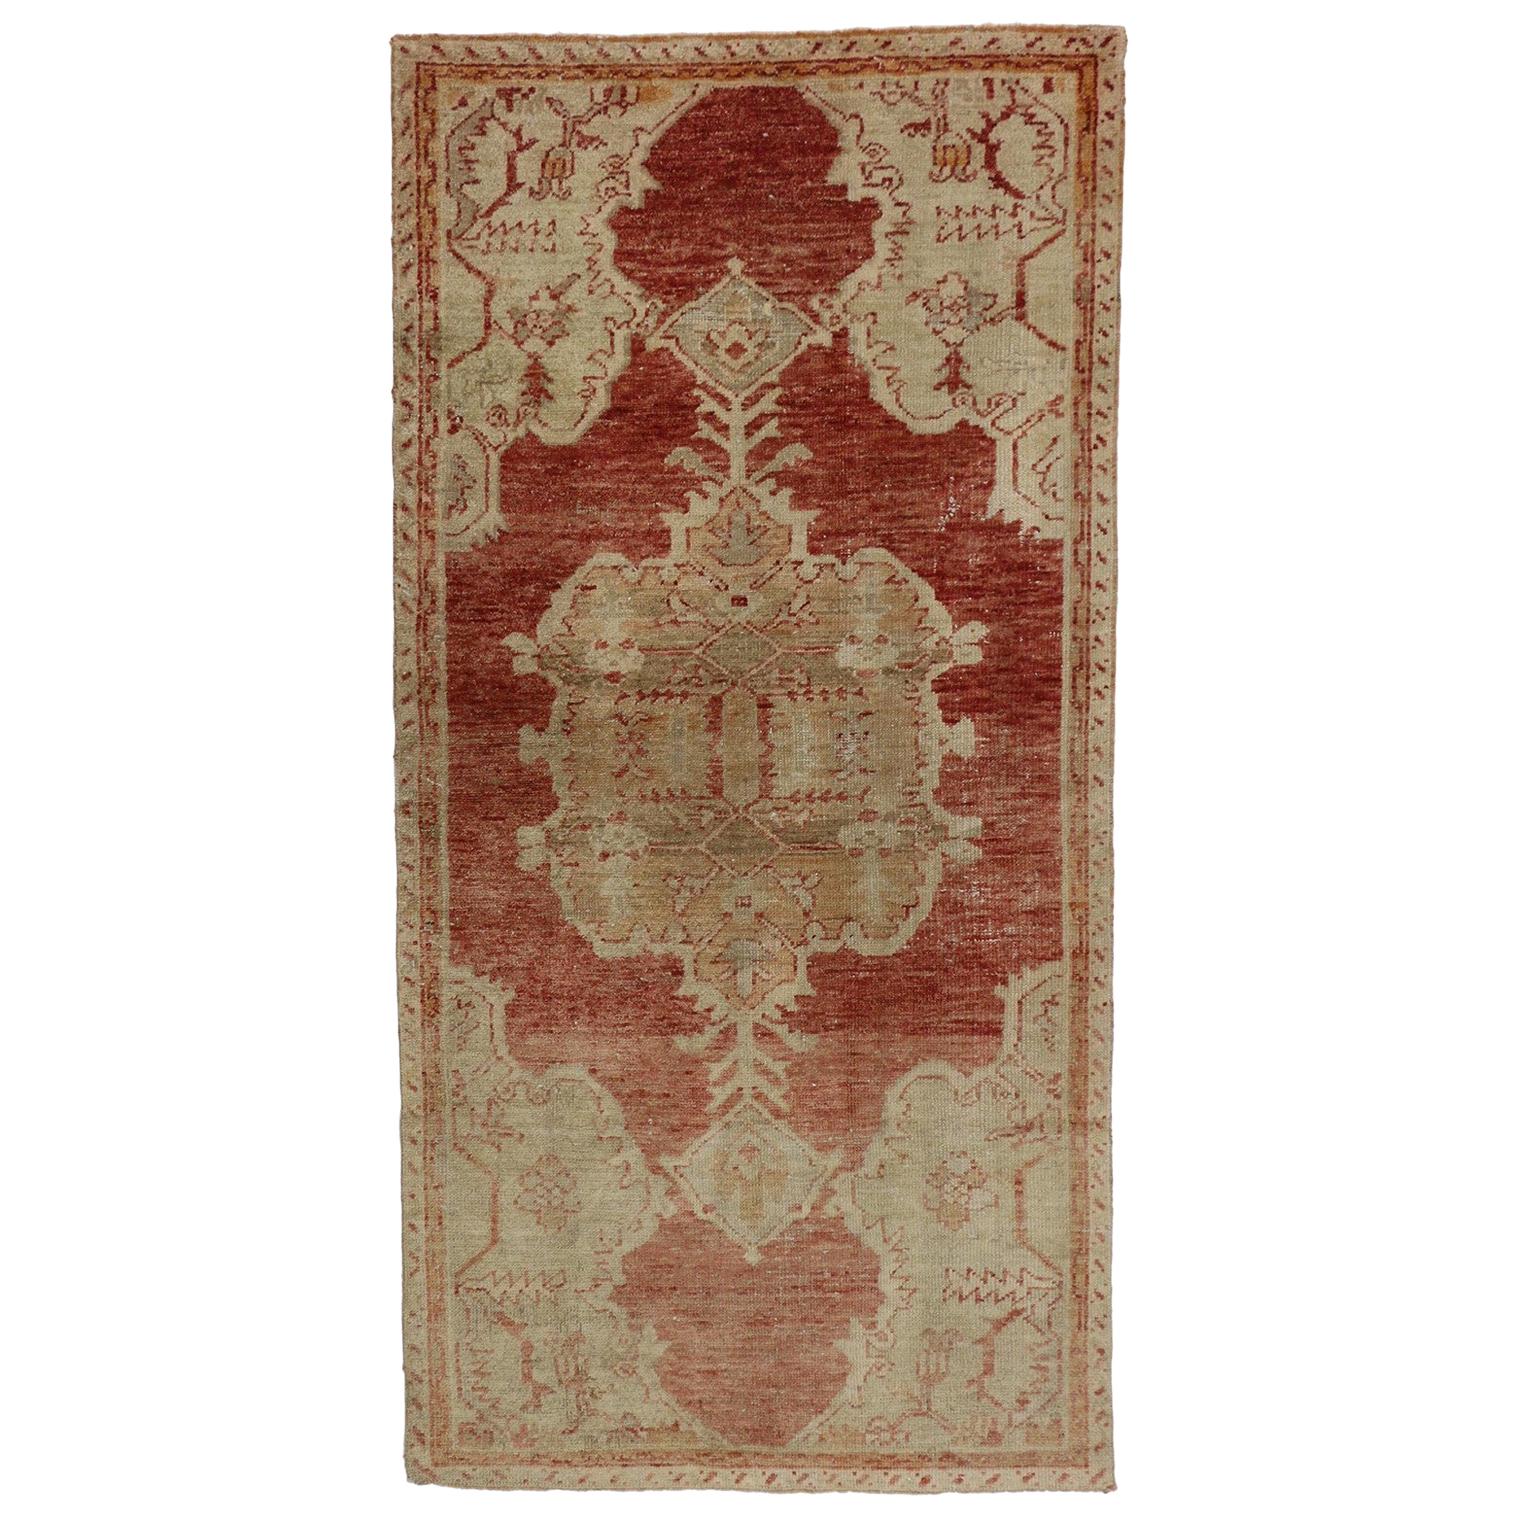 Distressed Vintage Turkish Oushak Rug with Rustic Artisan Industrial Style